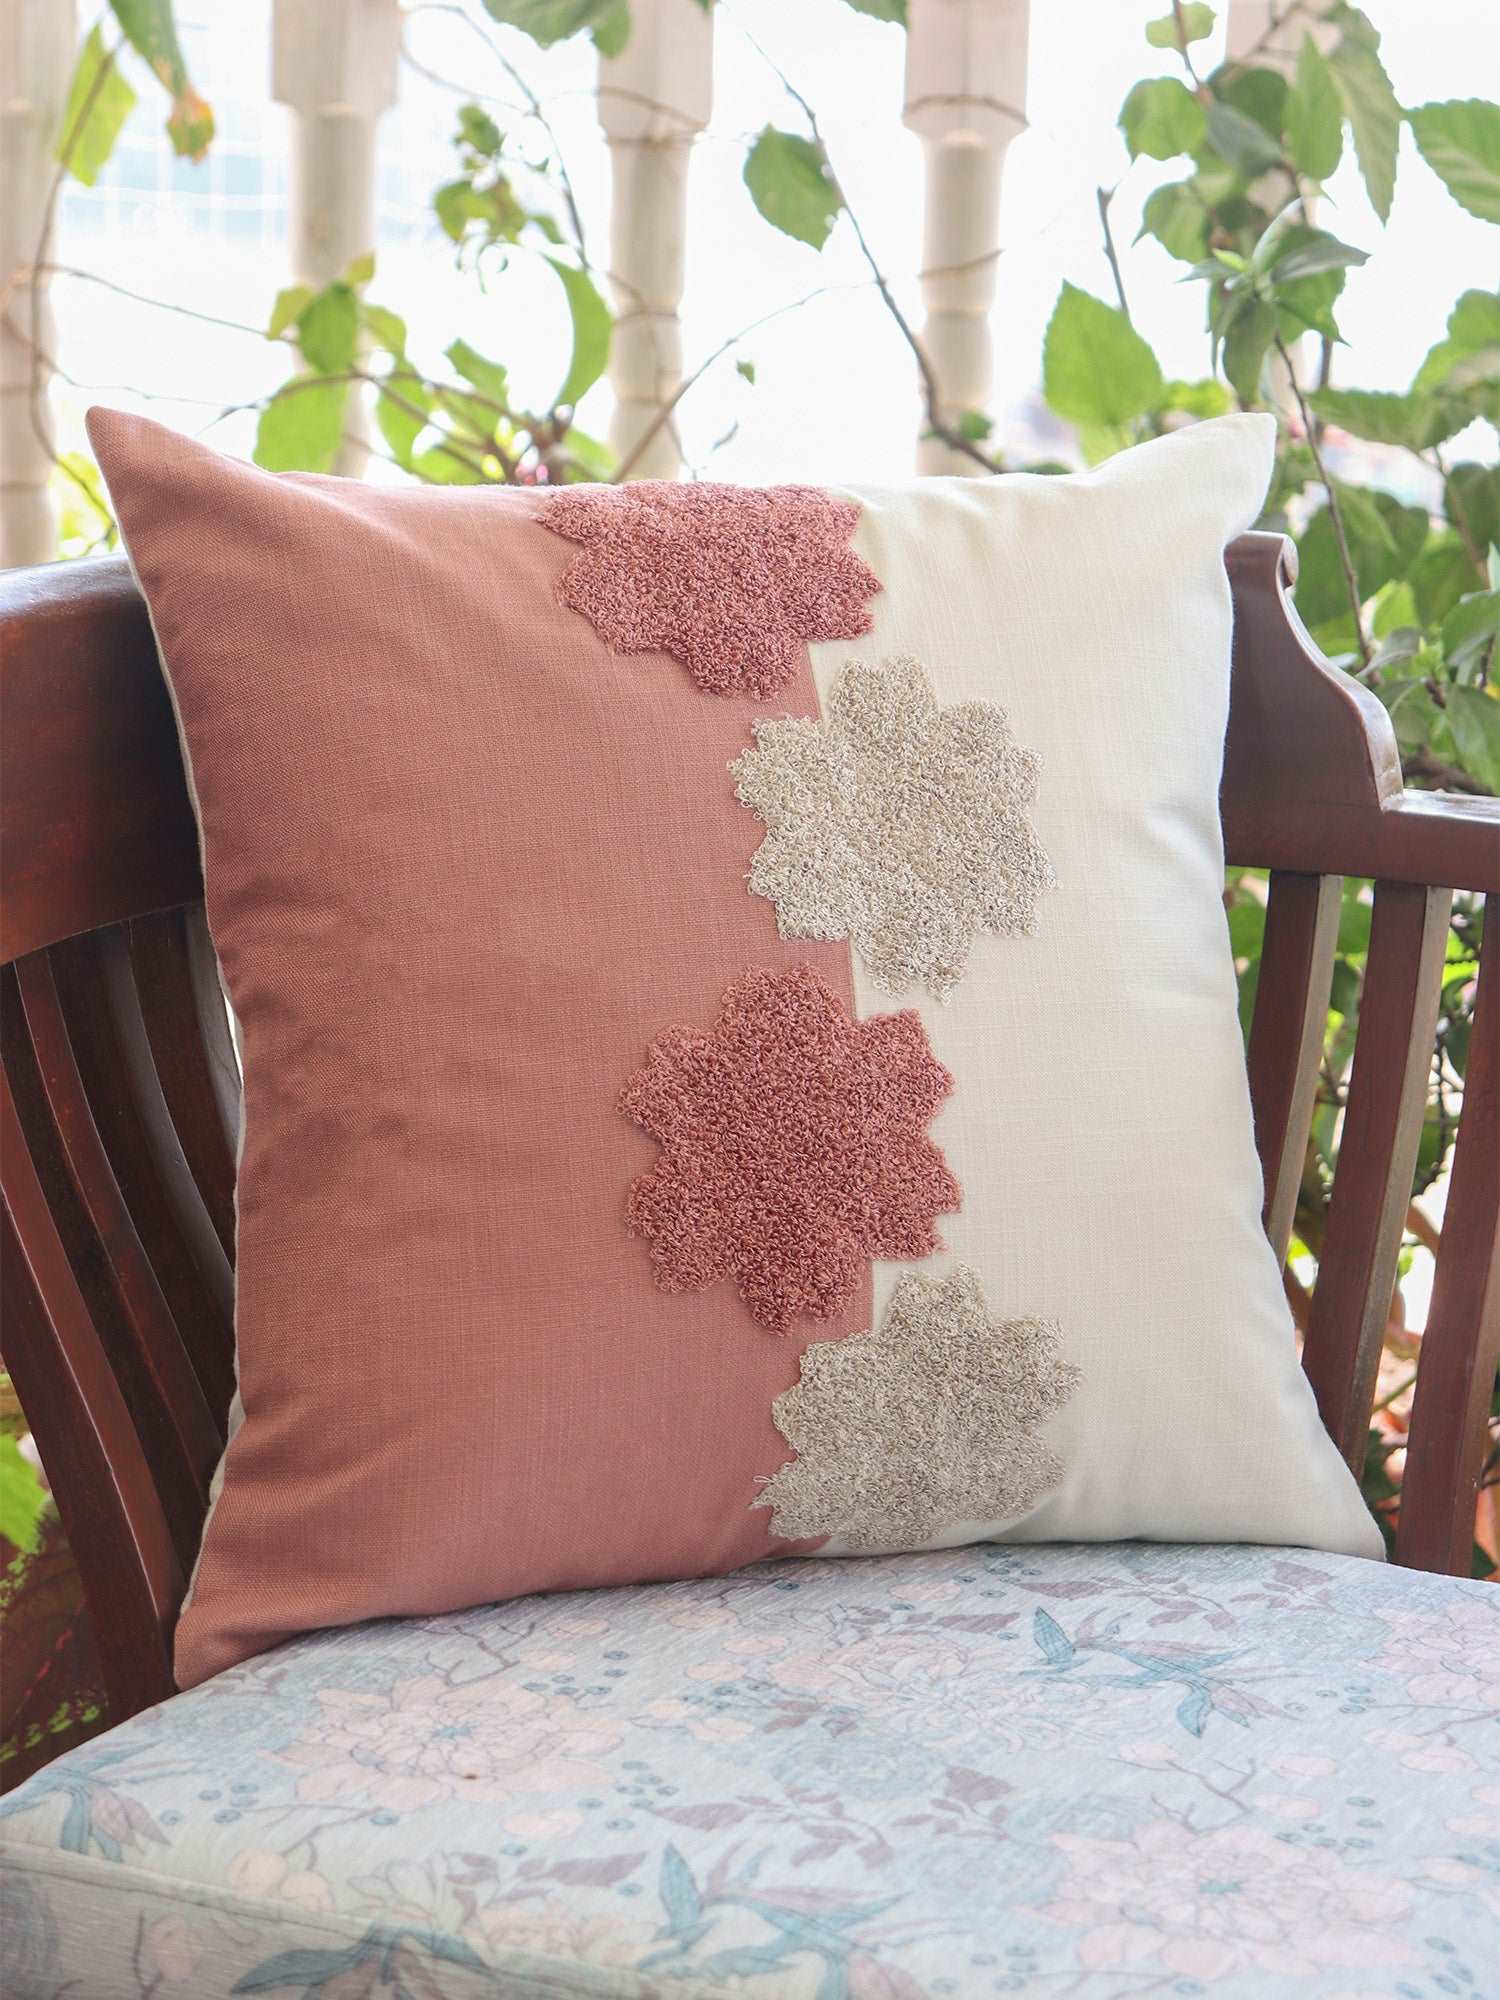 Cushion Cover Cotton Blend Floral Aari Embroidery with Patchwork Dark Coral - 16inches X 16inches